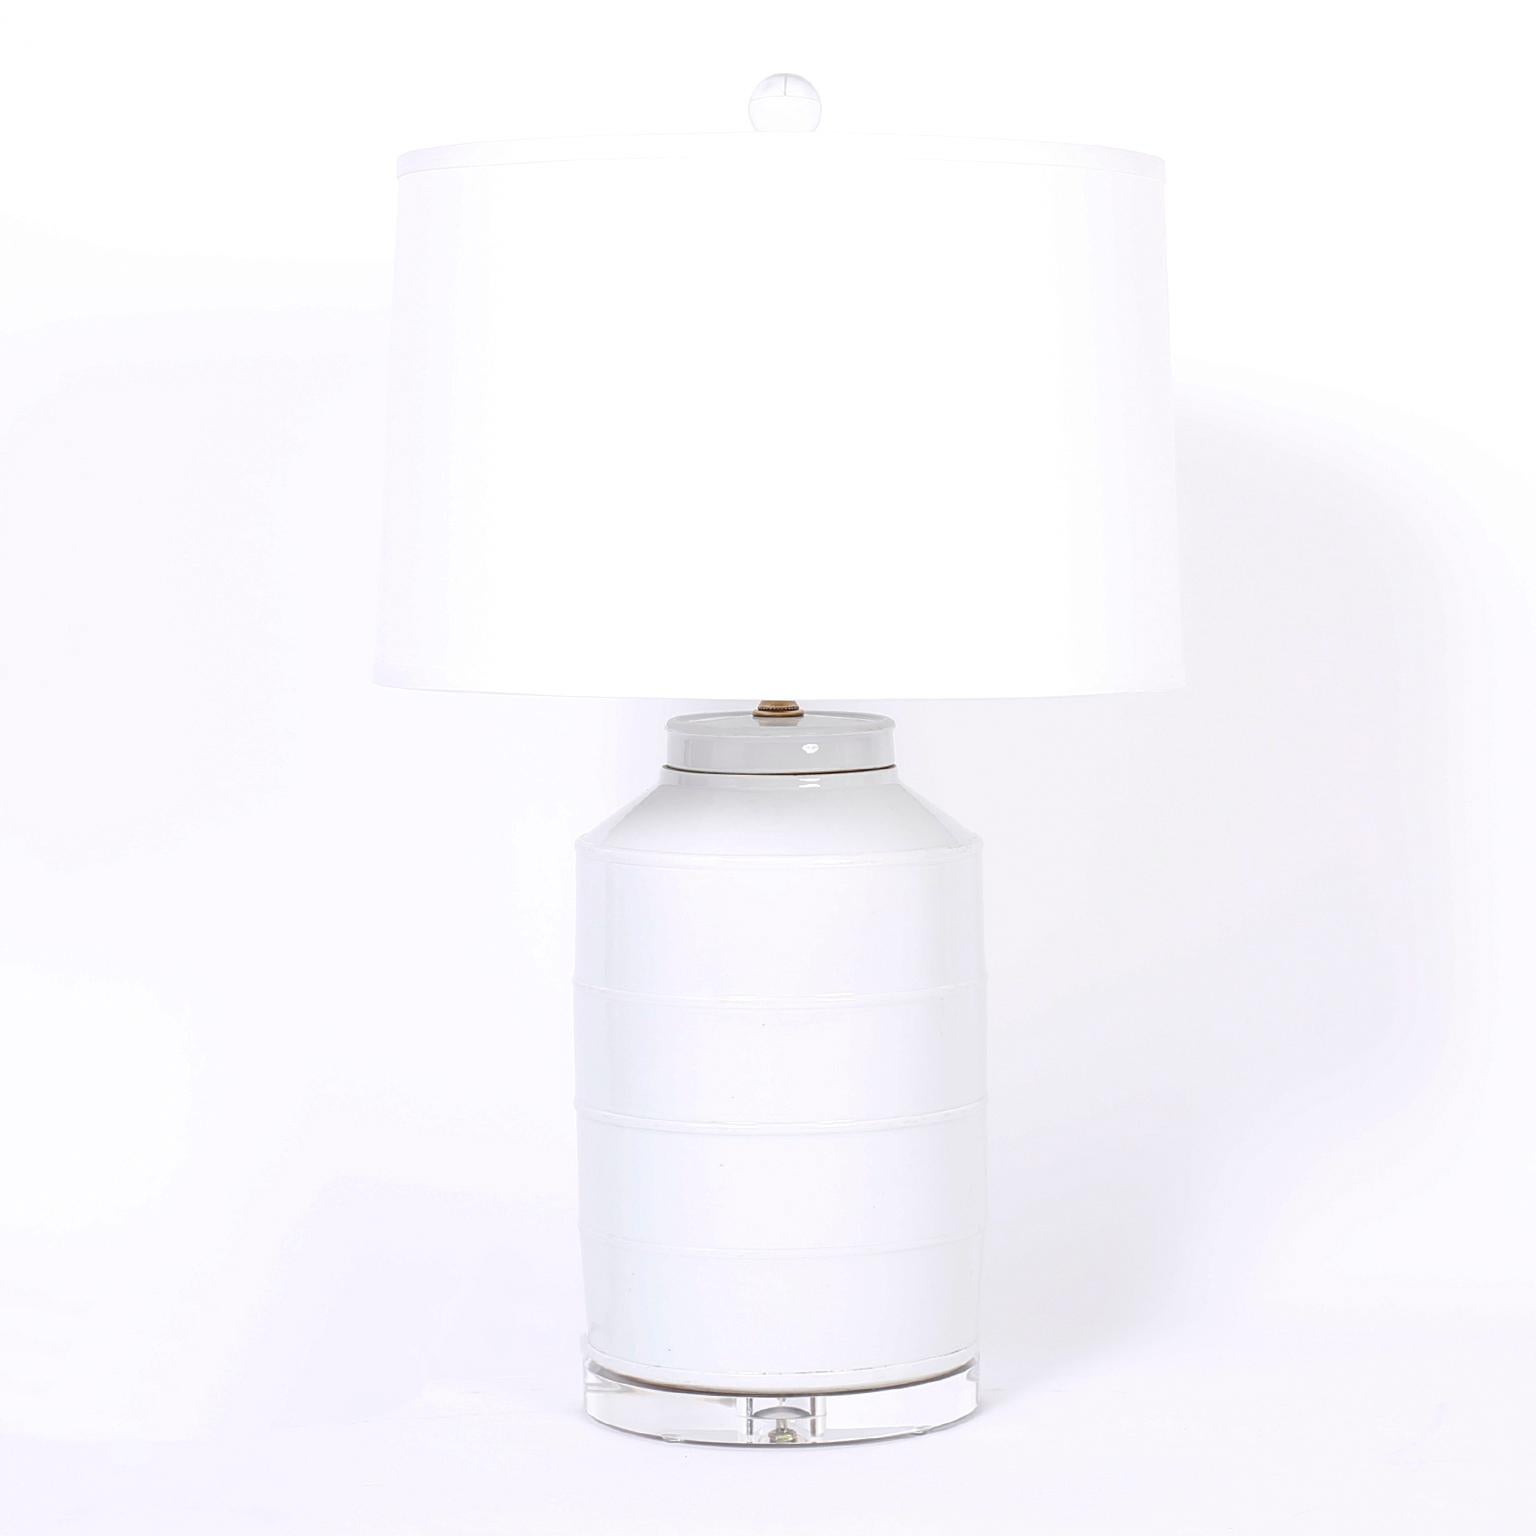 Pair of Chinese porcelain table lamps with a classic form and an off white celadon finish with four subtle rings around the diameter. Presented on lucite bases.